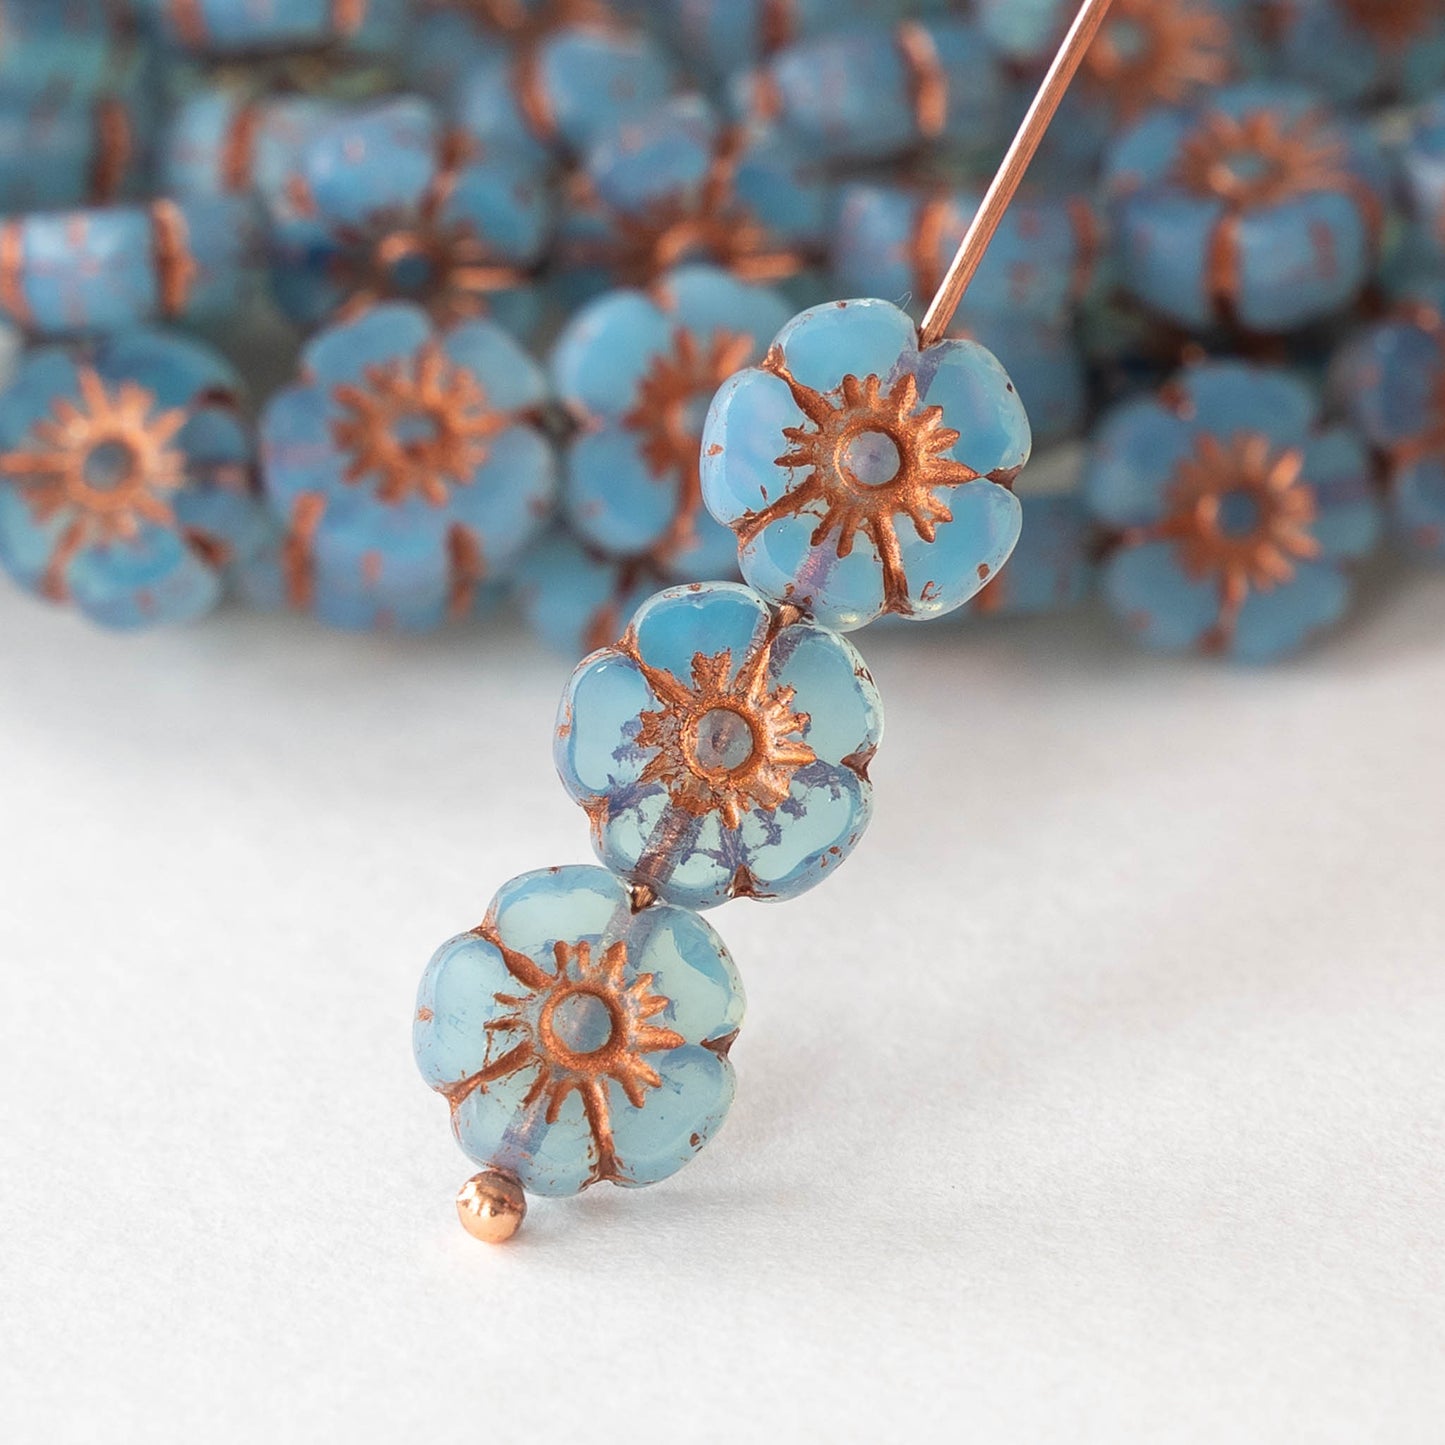 9mm Glass Flower Beads - Dusty Blue with Copper Wash - 16 beads